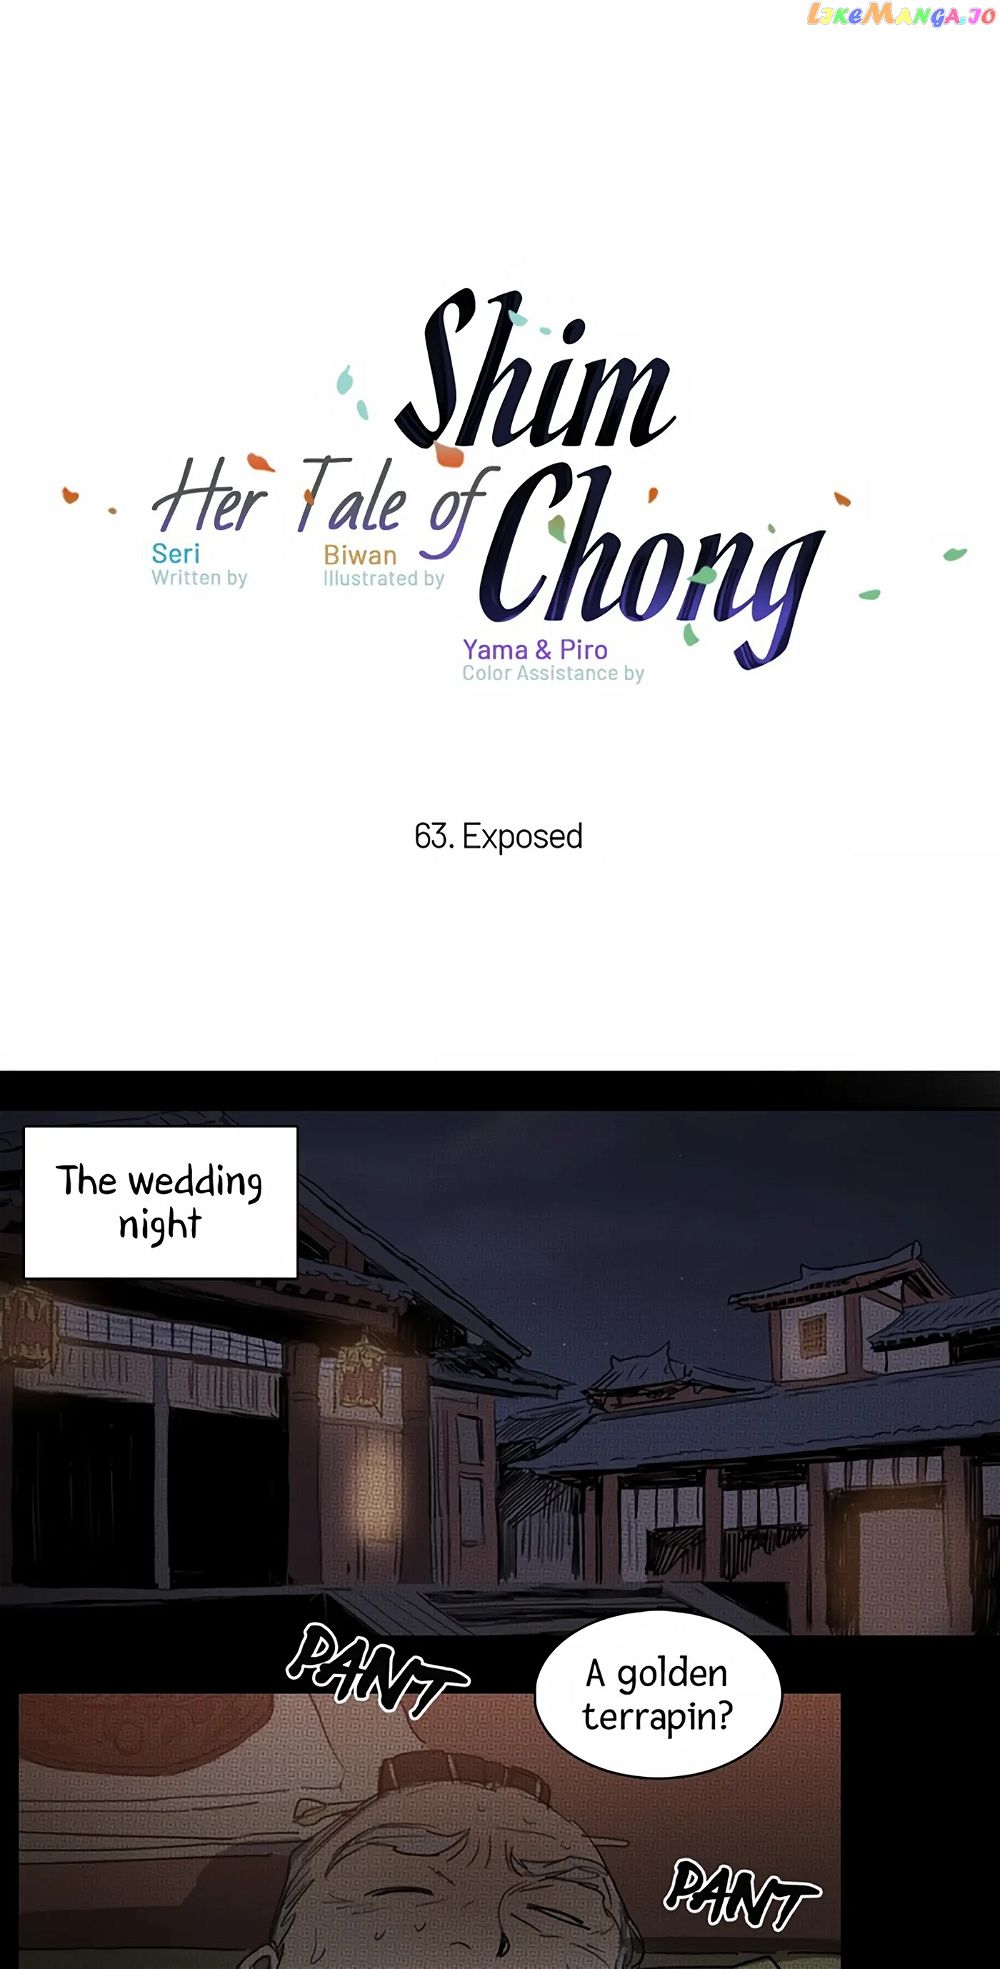 Her Tale of Shim Chong Chapter 63 - Page 1